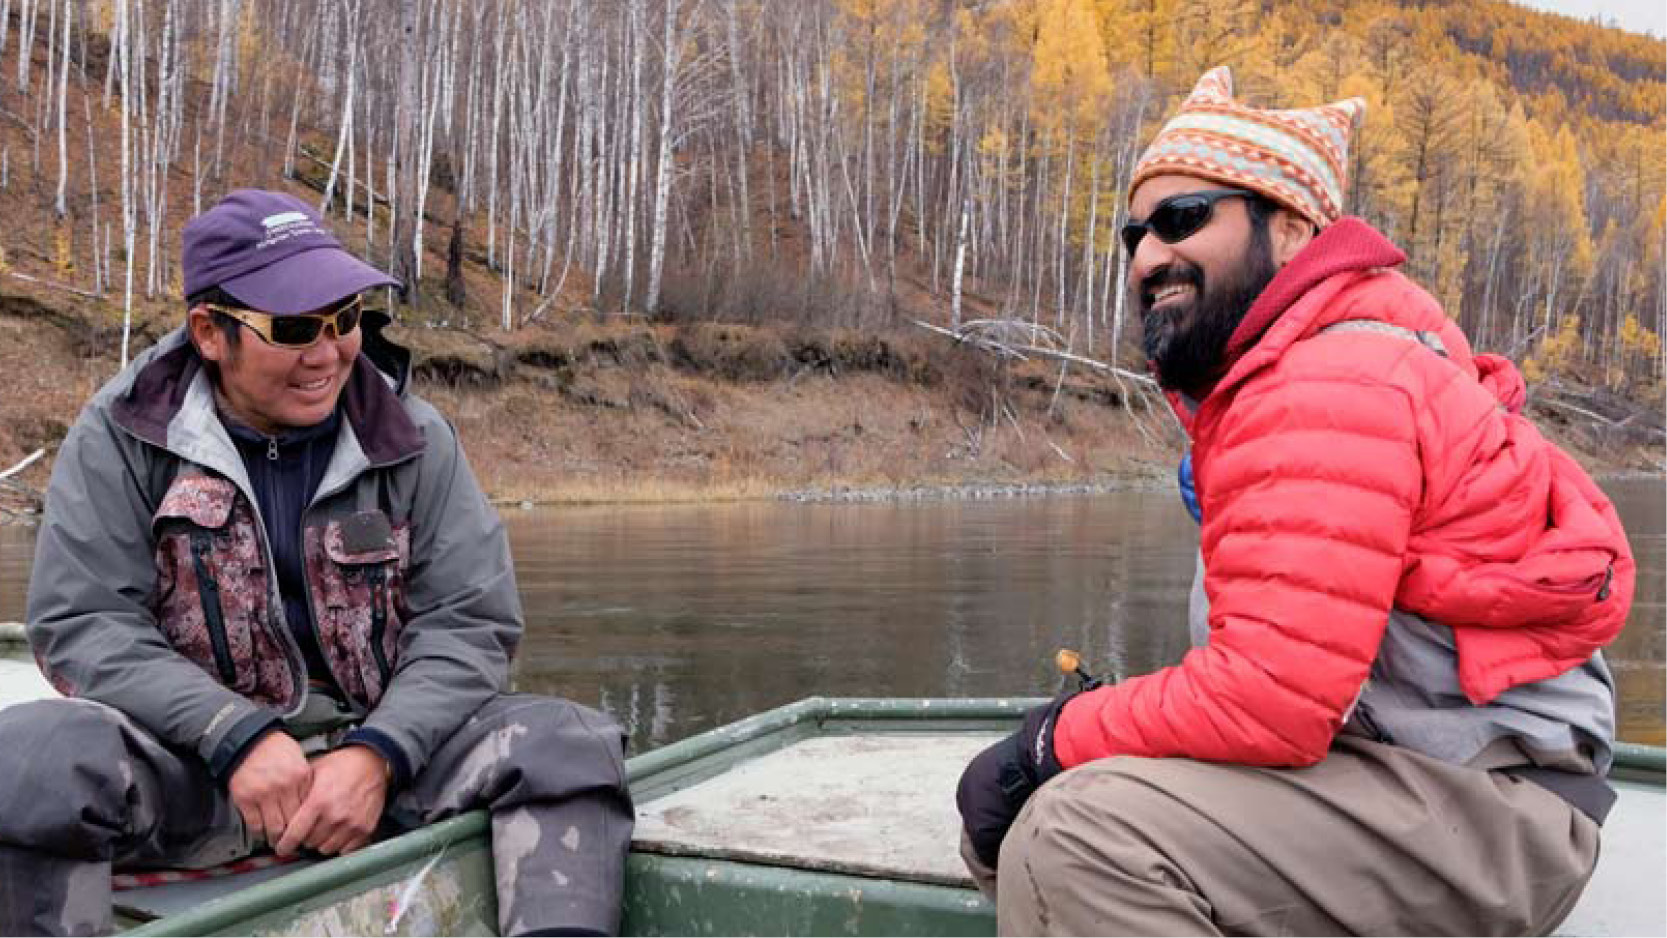 Sudeep Chandra on a boat with colleague conducting research